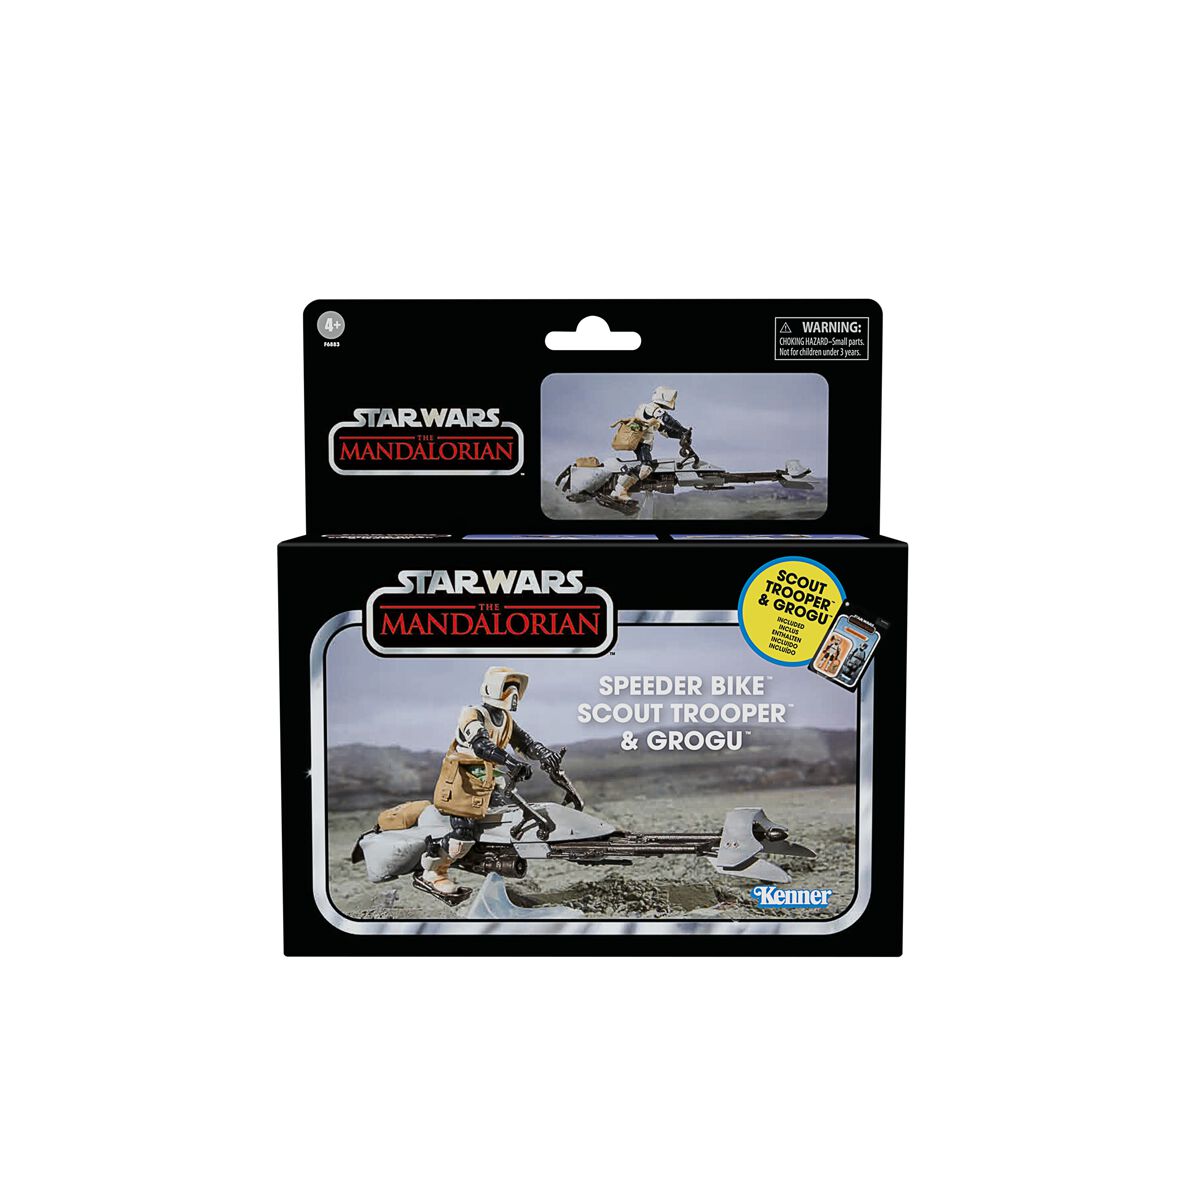 Star Wars The Mandalorian - Vintage Collection - Speeder Bike with Scout Trooper & Grogu Actionfigur multicolor